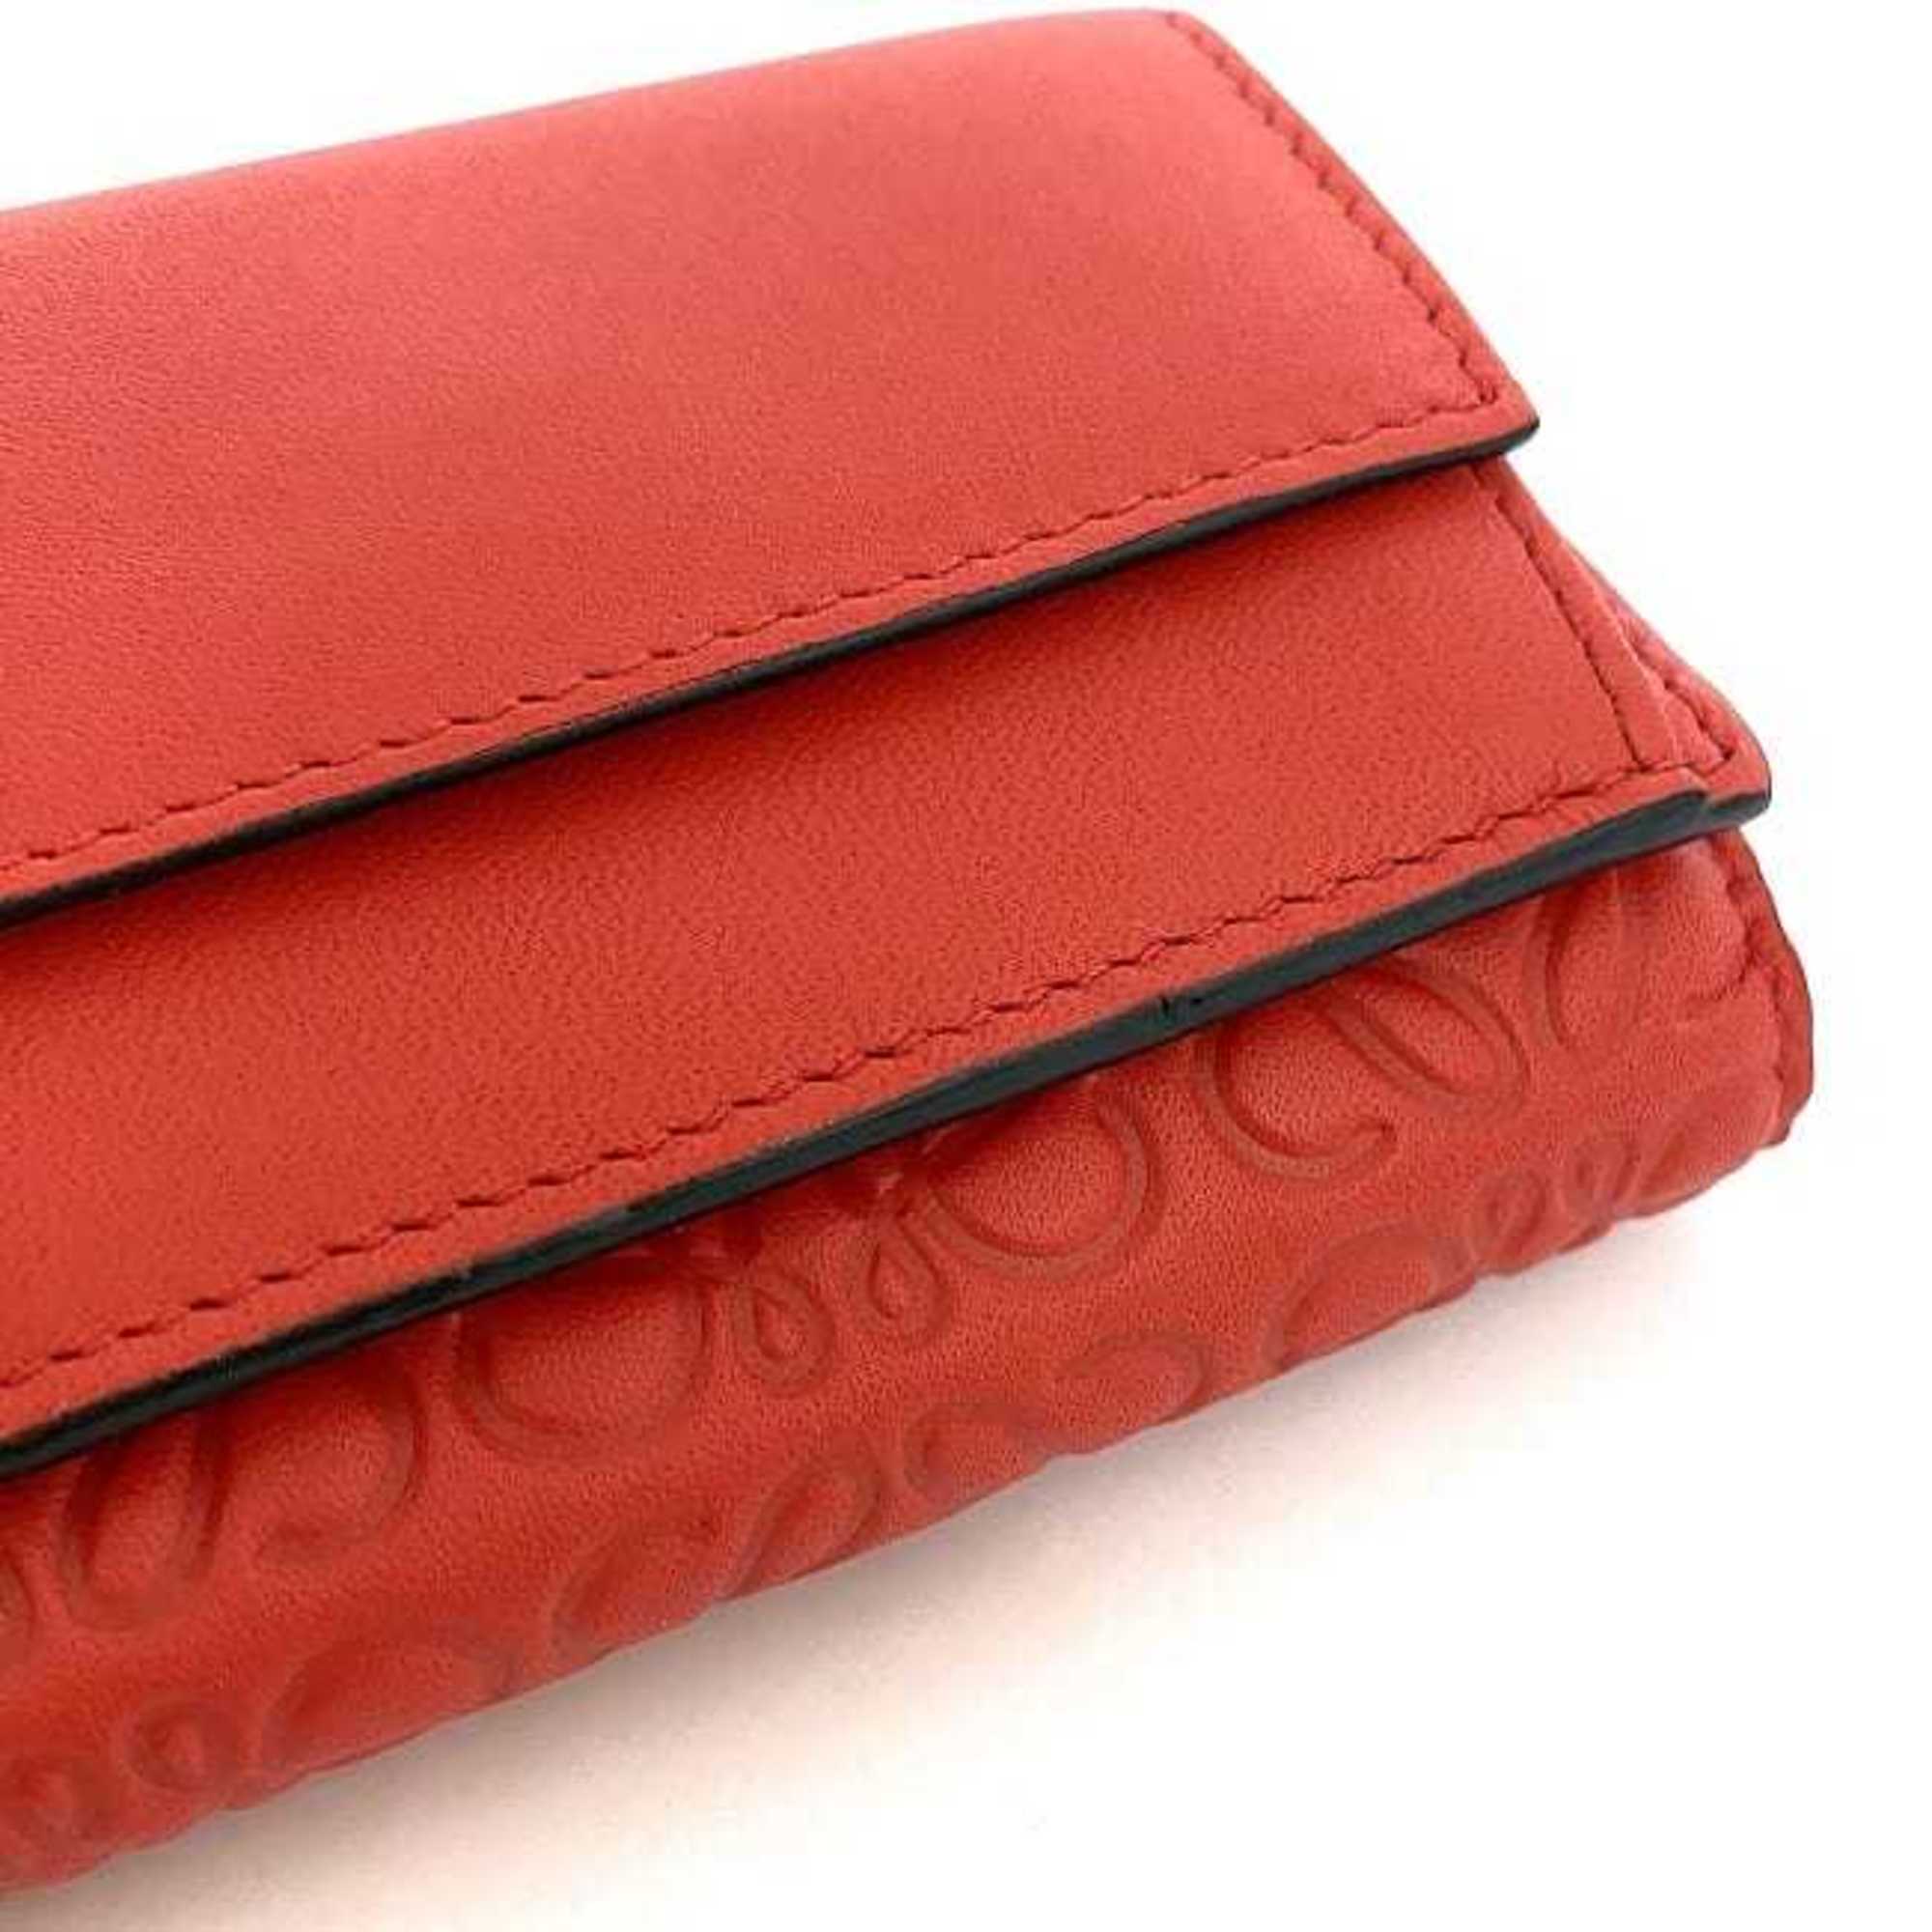 LOEWE Tri-fold Wallet Red Anagram 107.55.S26 f-20473 Leather Compact Vivid Women's